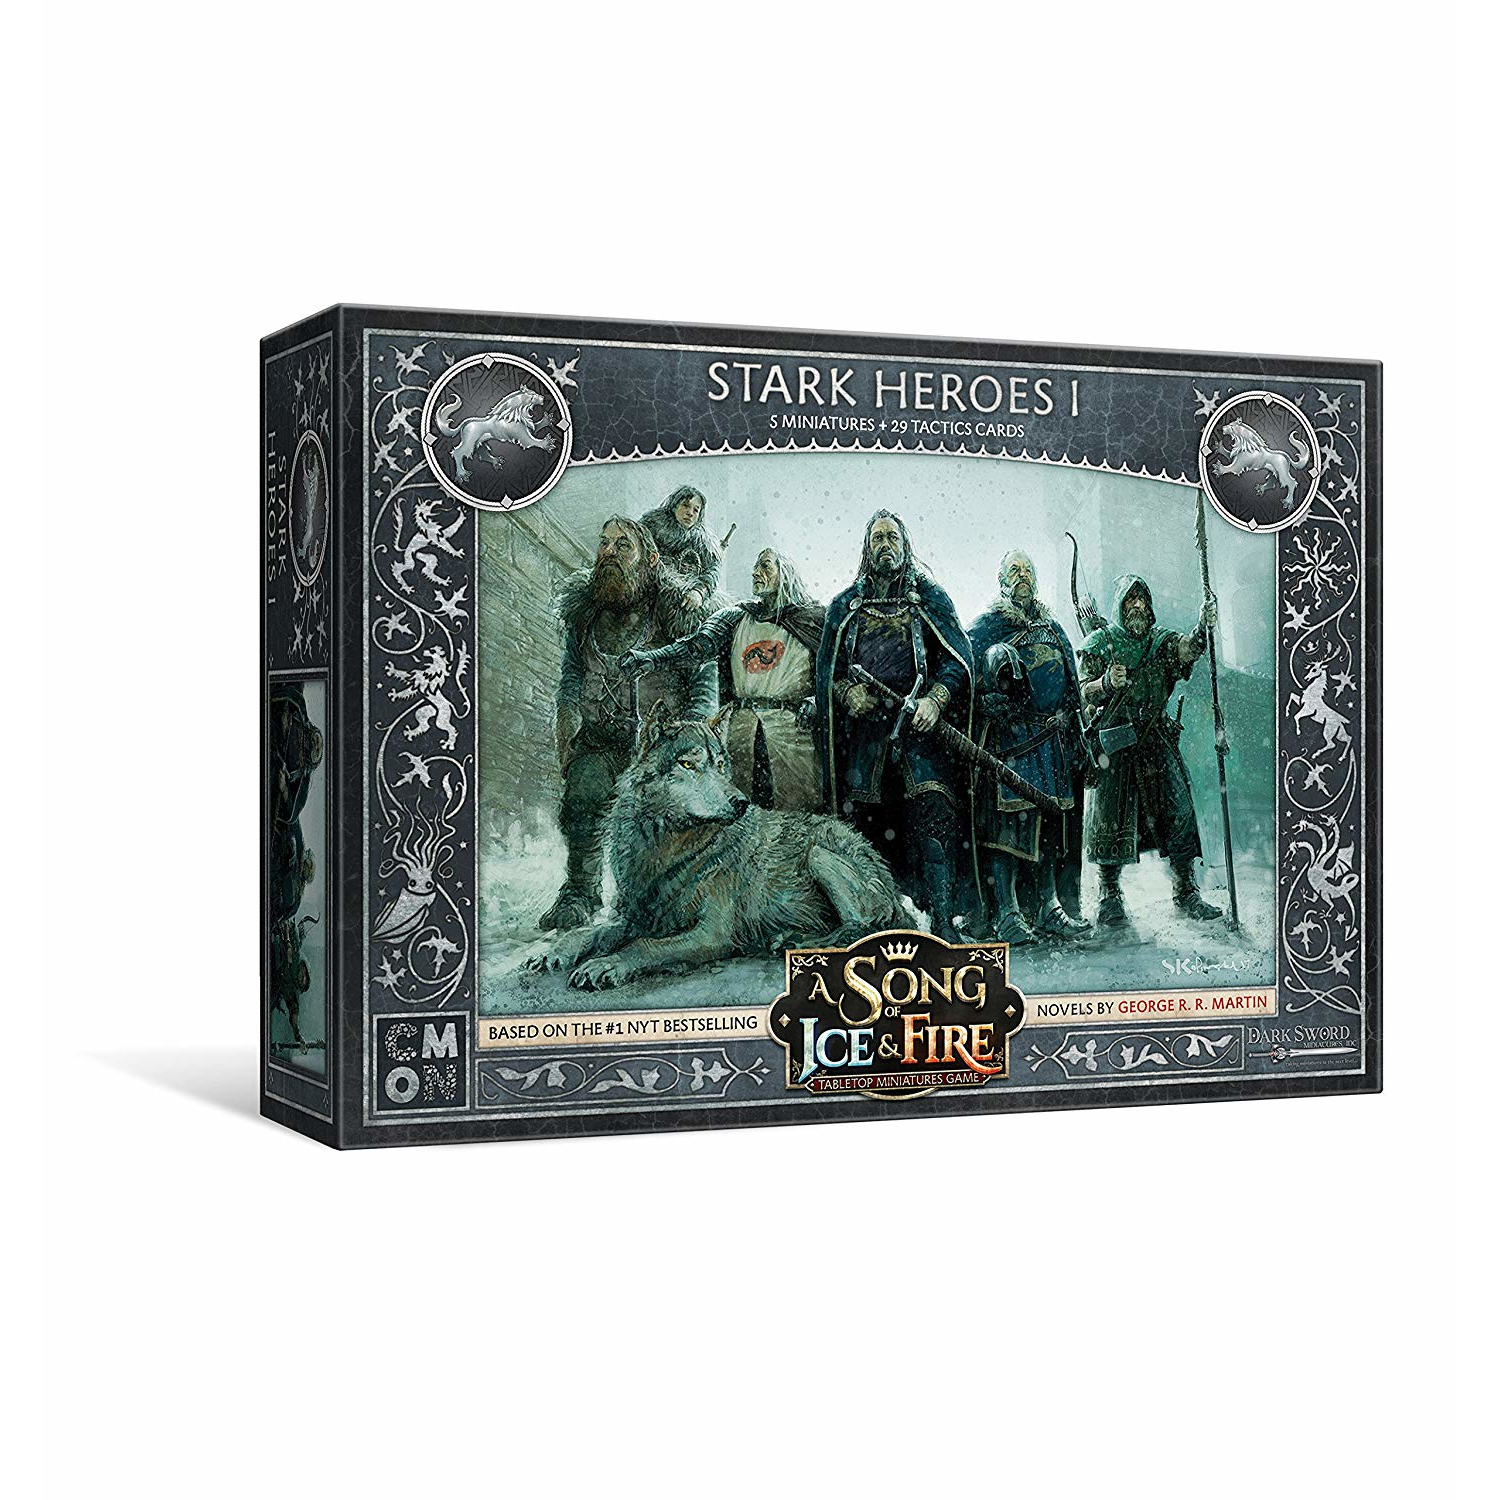 A Song of Ice & Fire: Tabletop Miniatures Game Stark Heroes 1 Box, by CMON - image 1 of 5